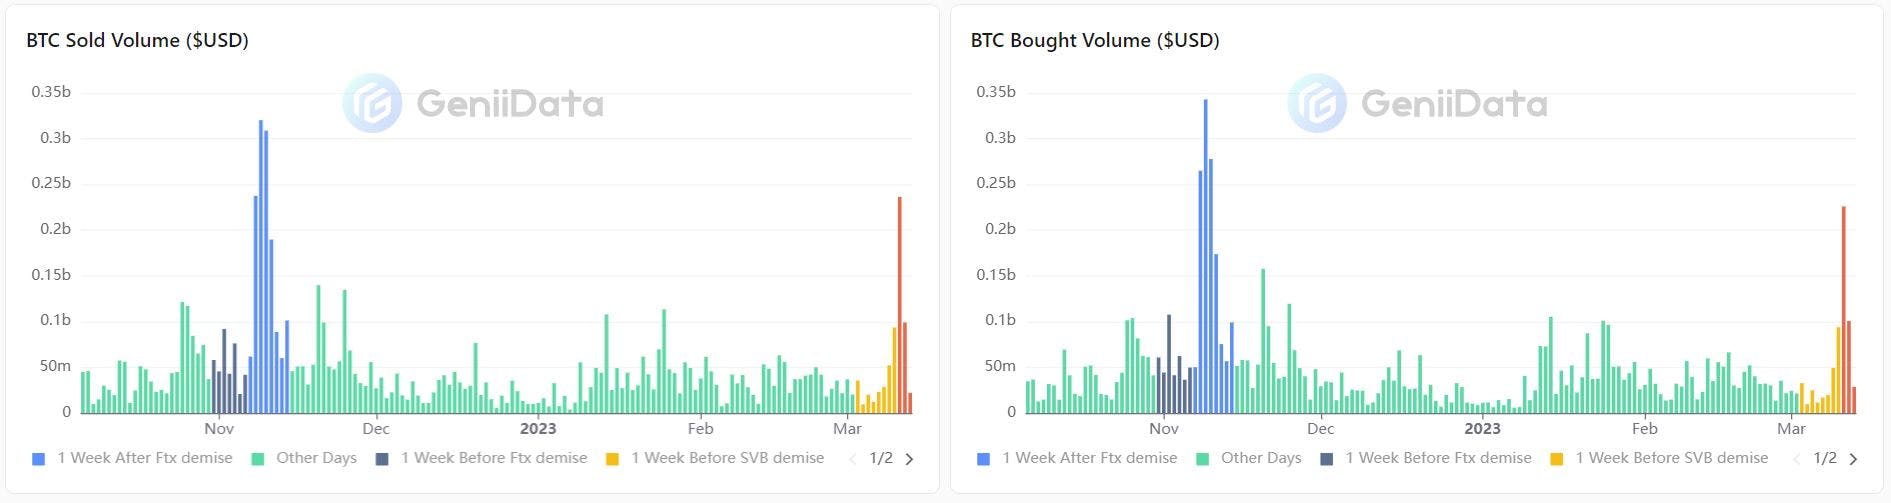 BTC Swapped Volume(BTC & $USD) to/from Other Assets